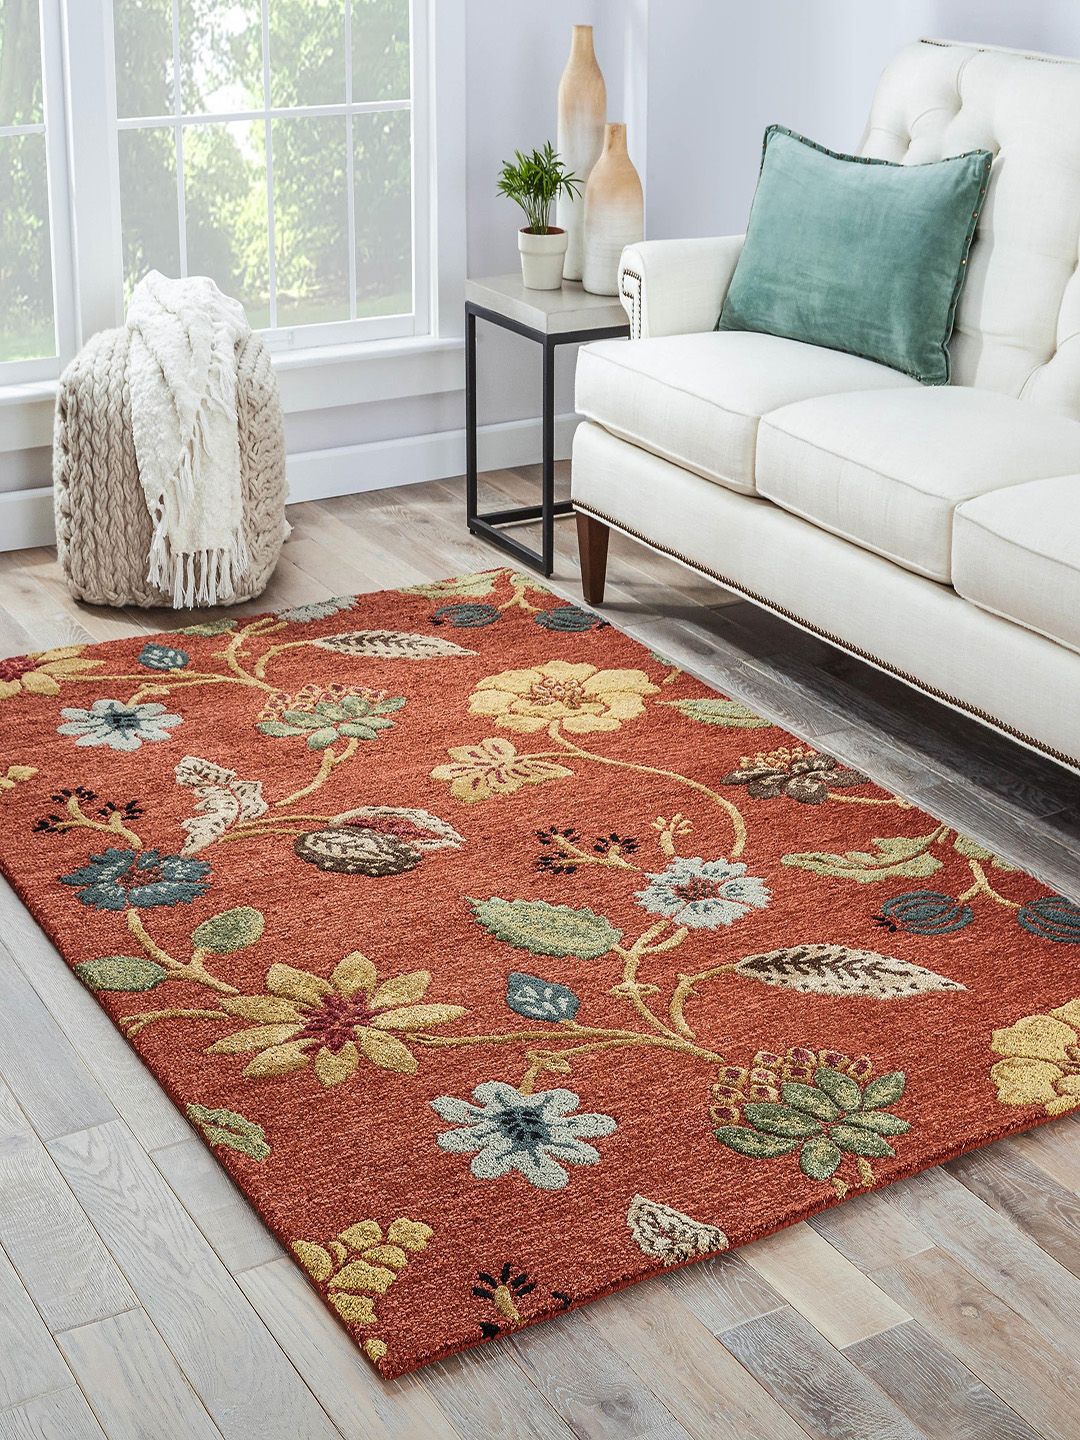 Jaipur Rugs Rust-Coloured & Green Floral Printed Hand-Tufted Carpet Price in India